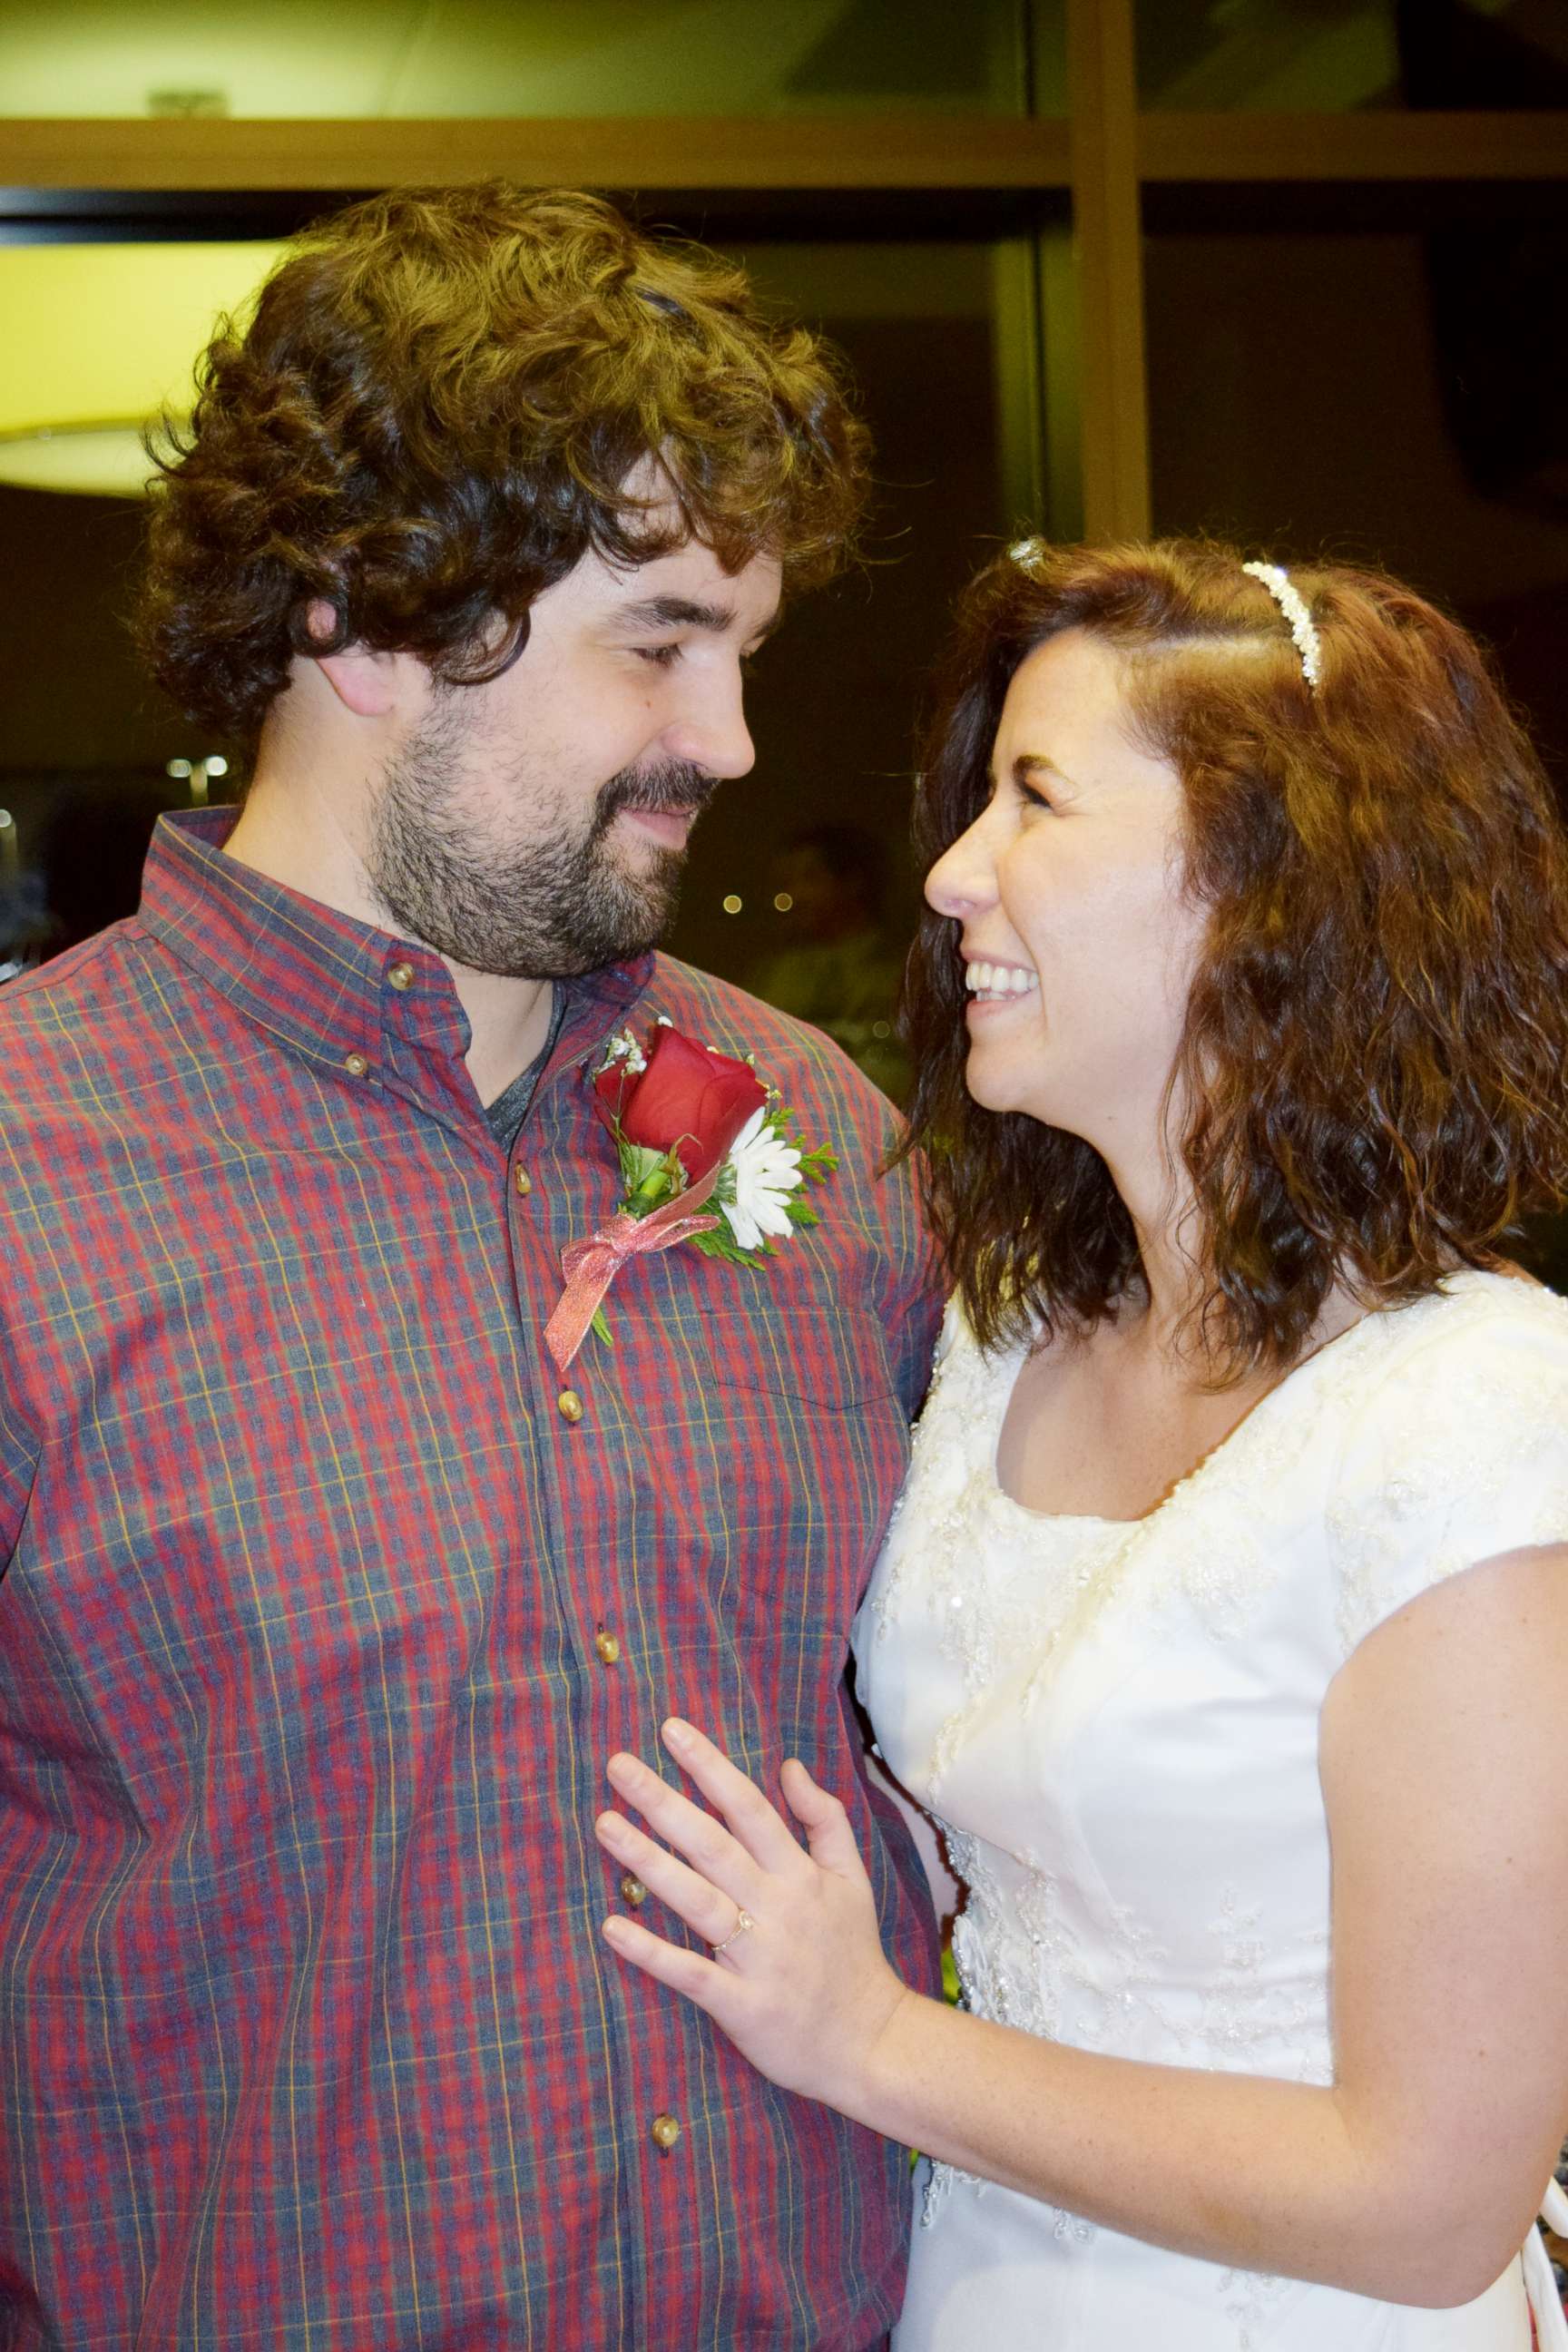 PHOTO: Nathan and Whitney Romans married at St. Luke's Magic Valley Medical Center in Twin Falls, Idaho.